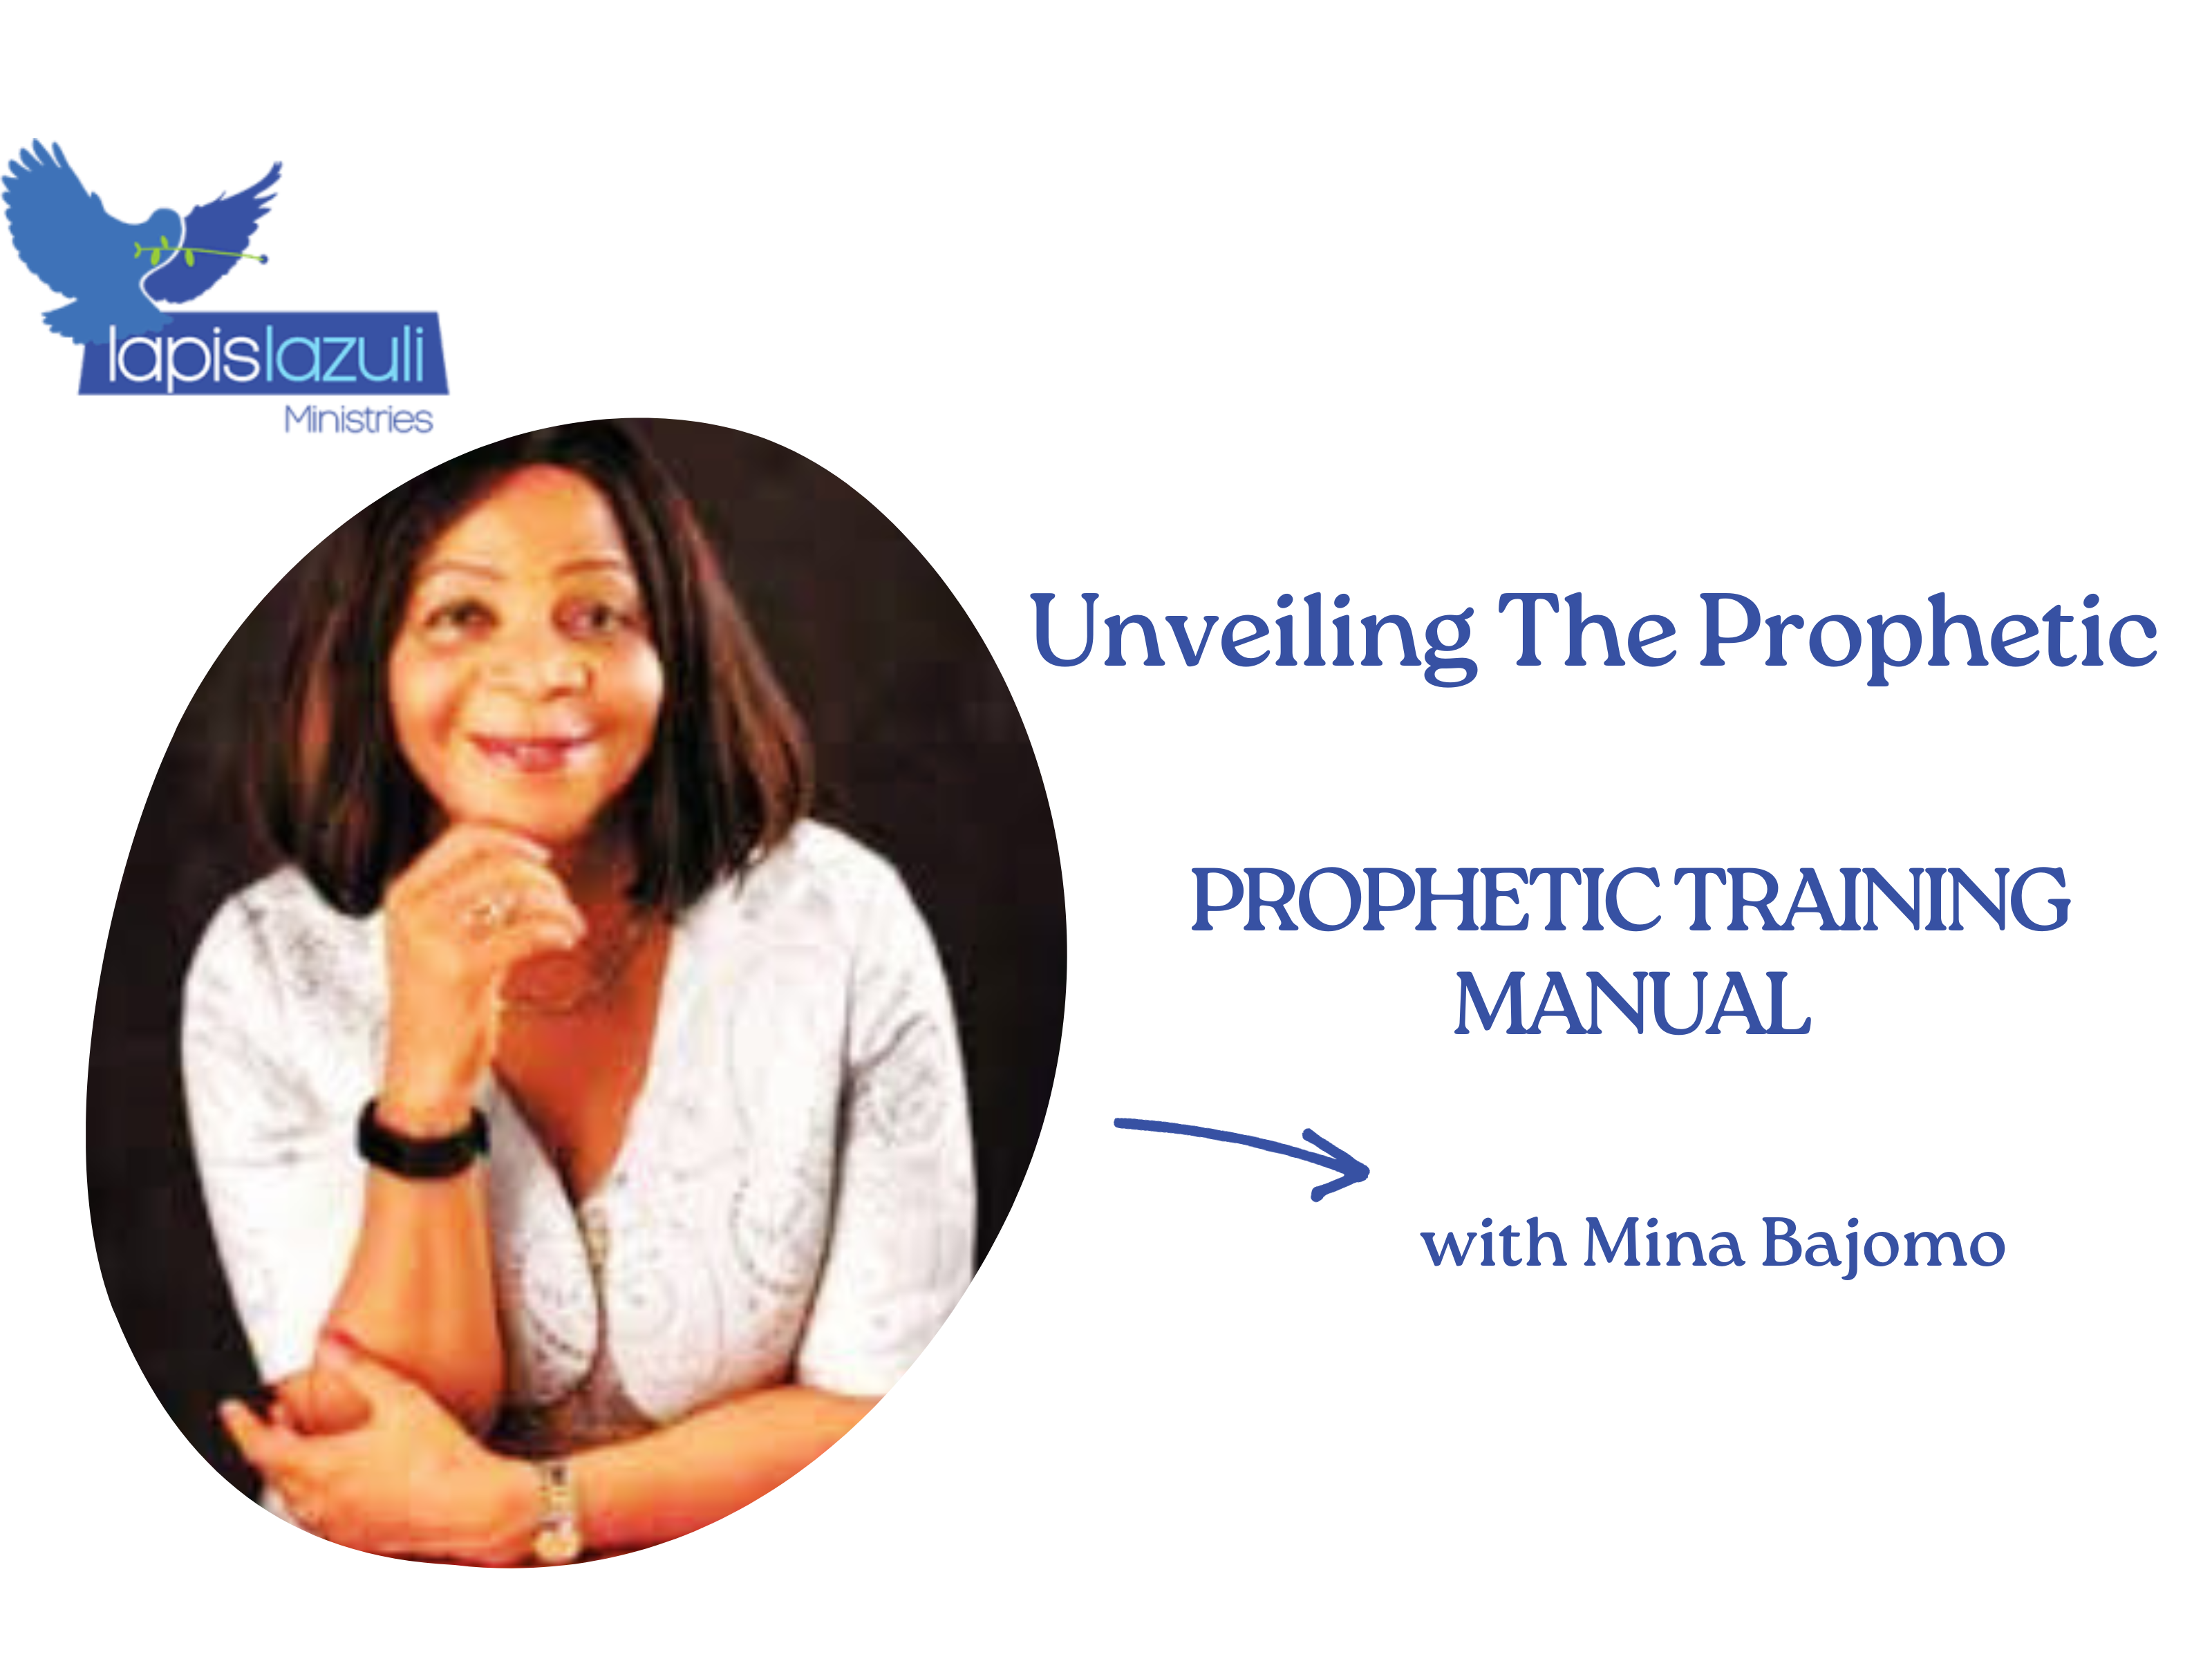 Unveiling The Prophetic: Prophetic Training Manual